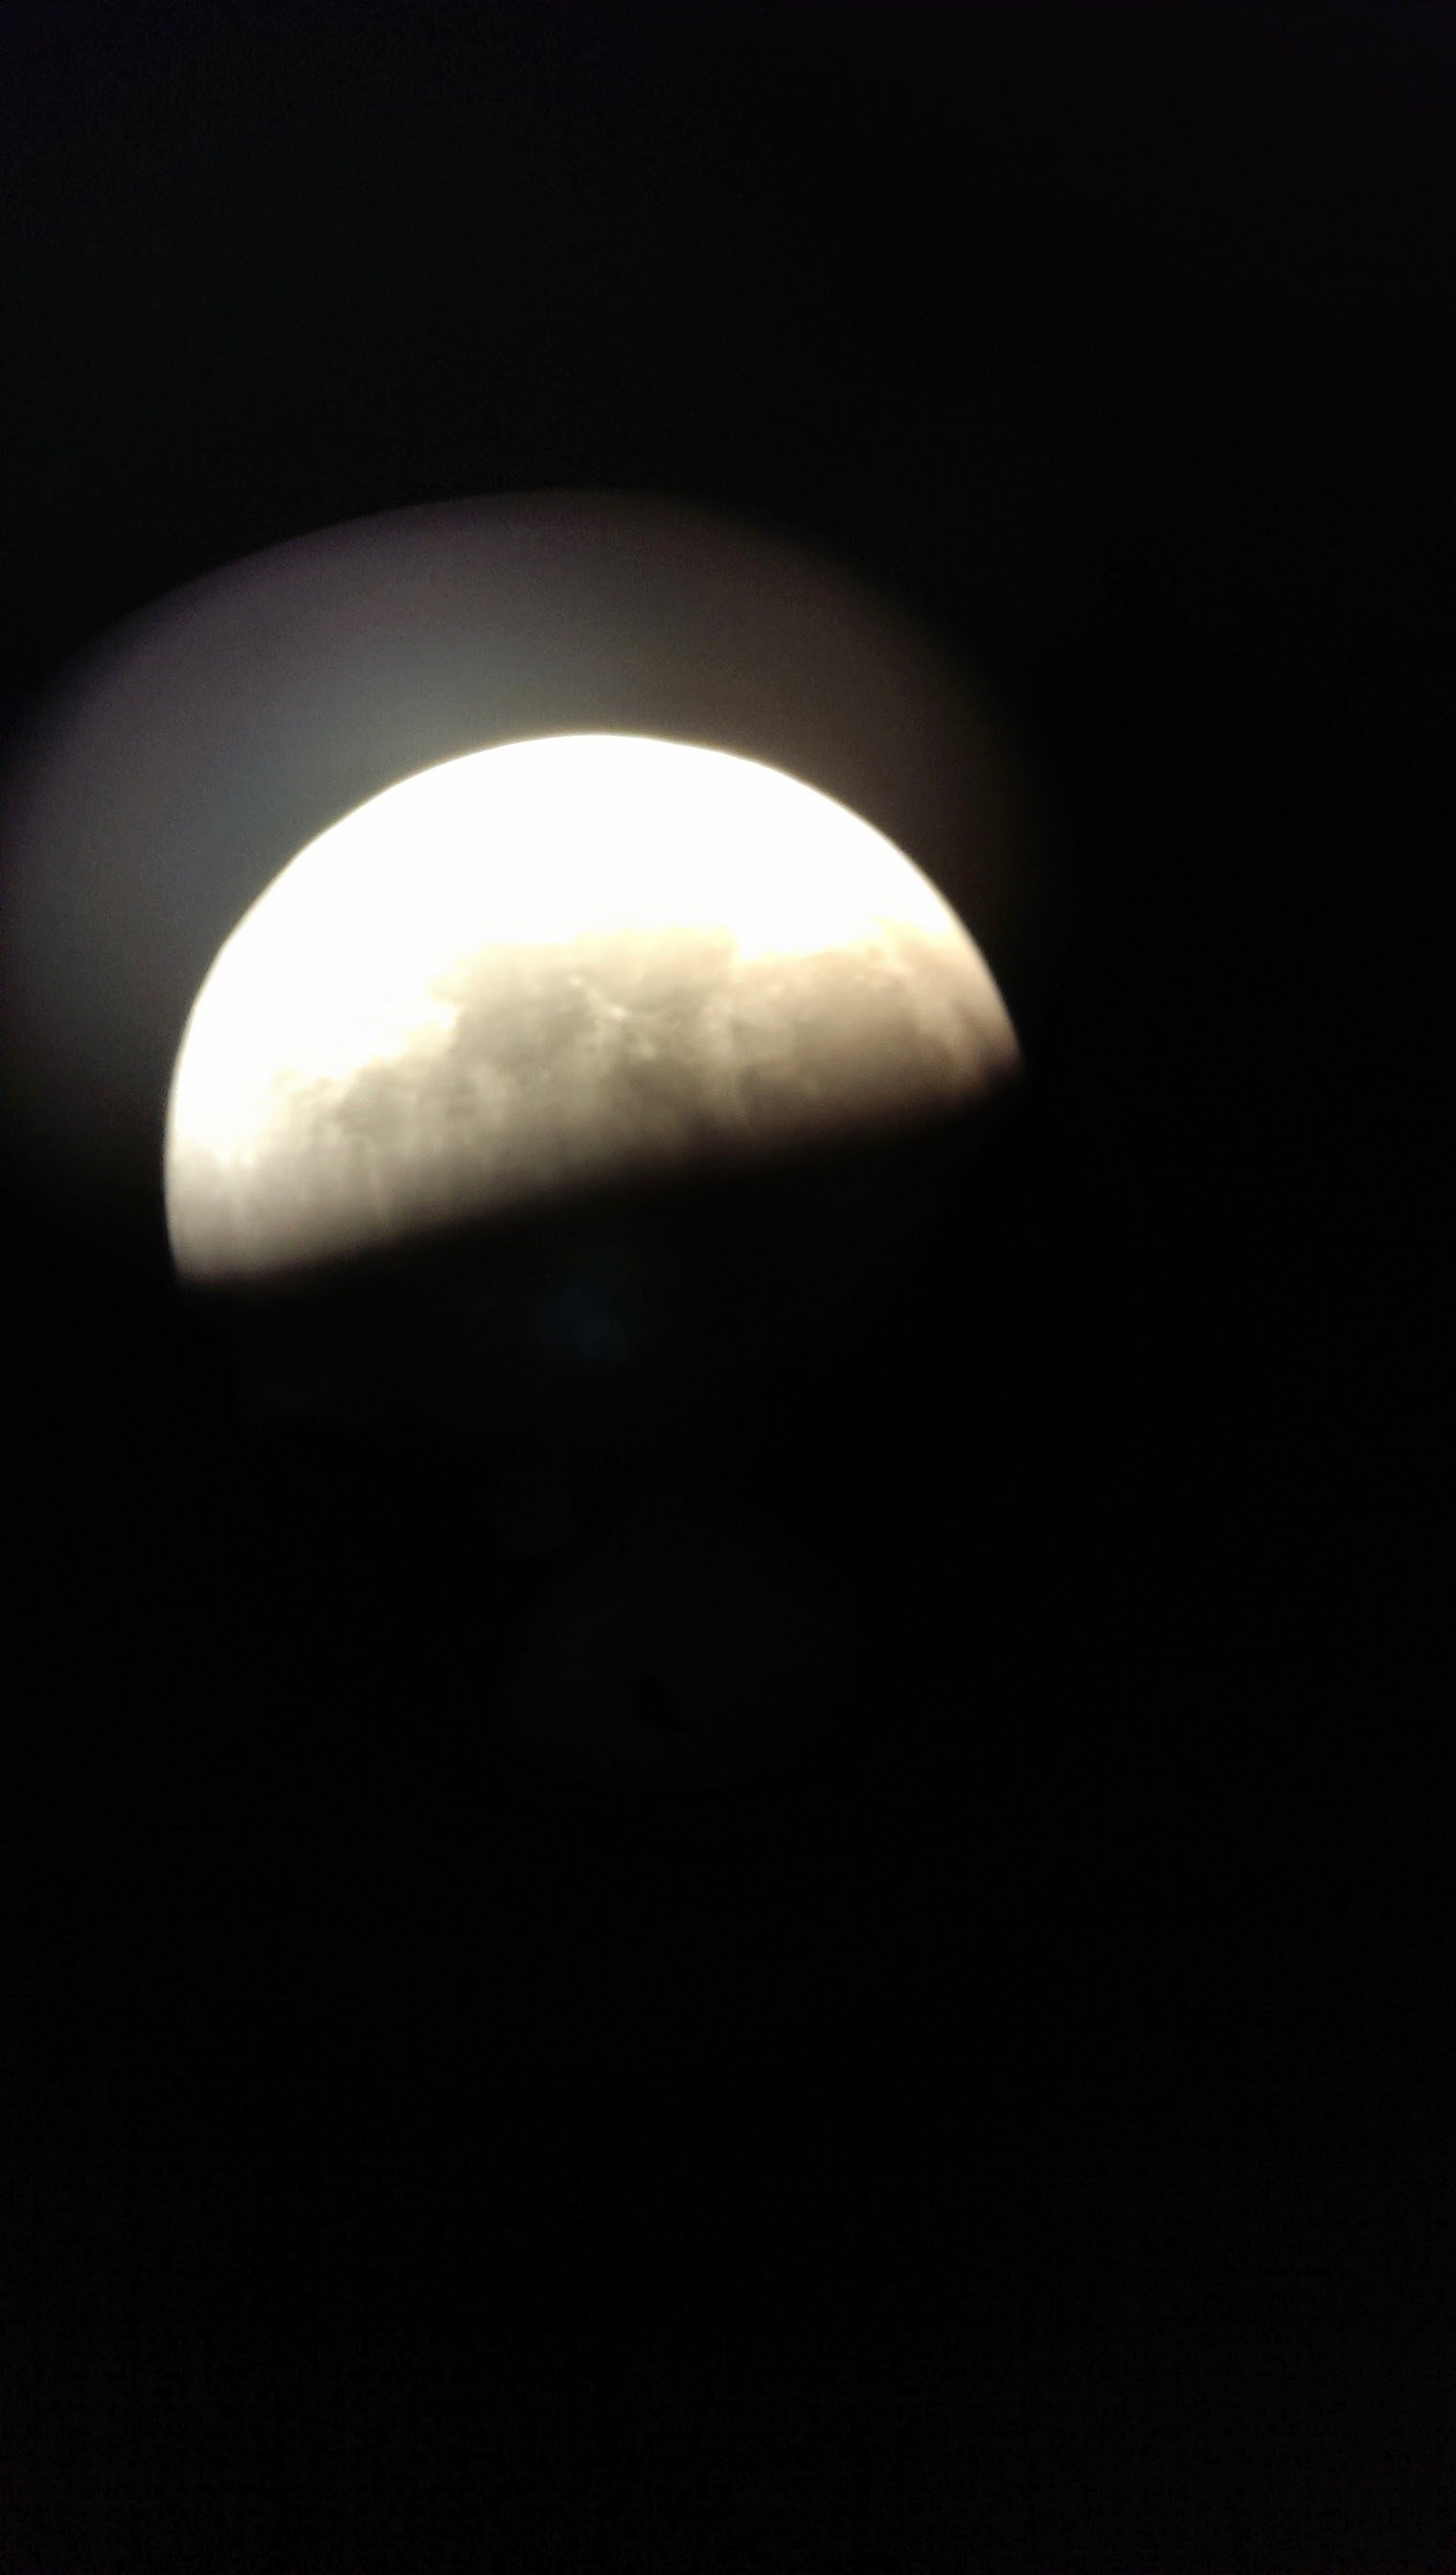  Image of the moon taken with a cell phone held up to a telescope 